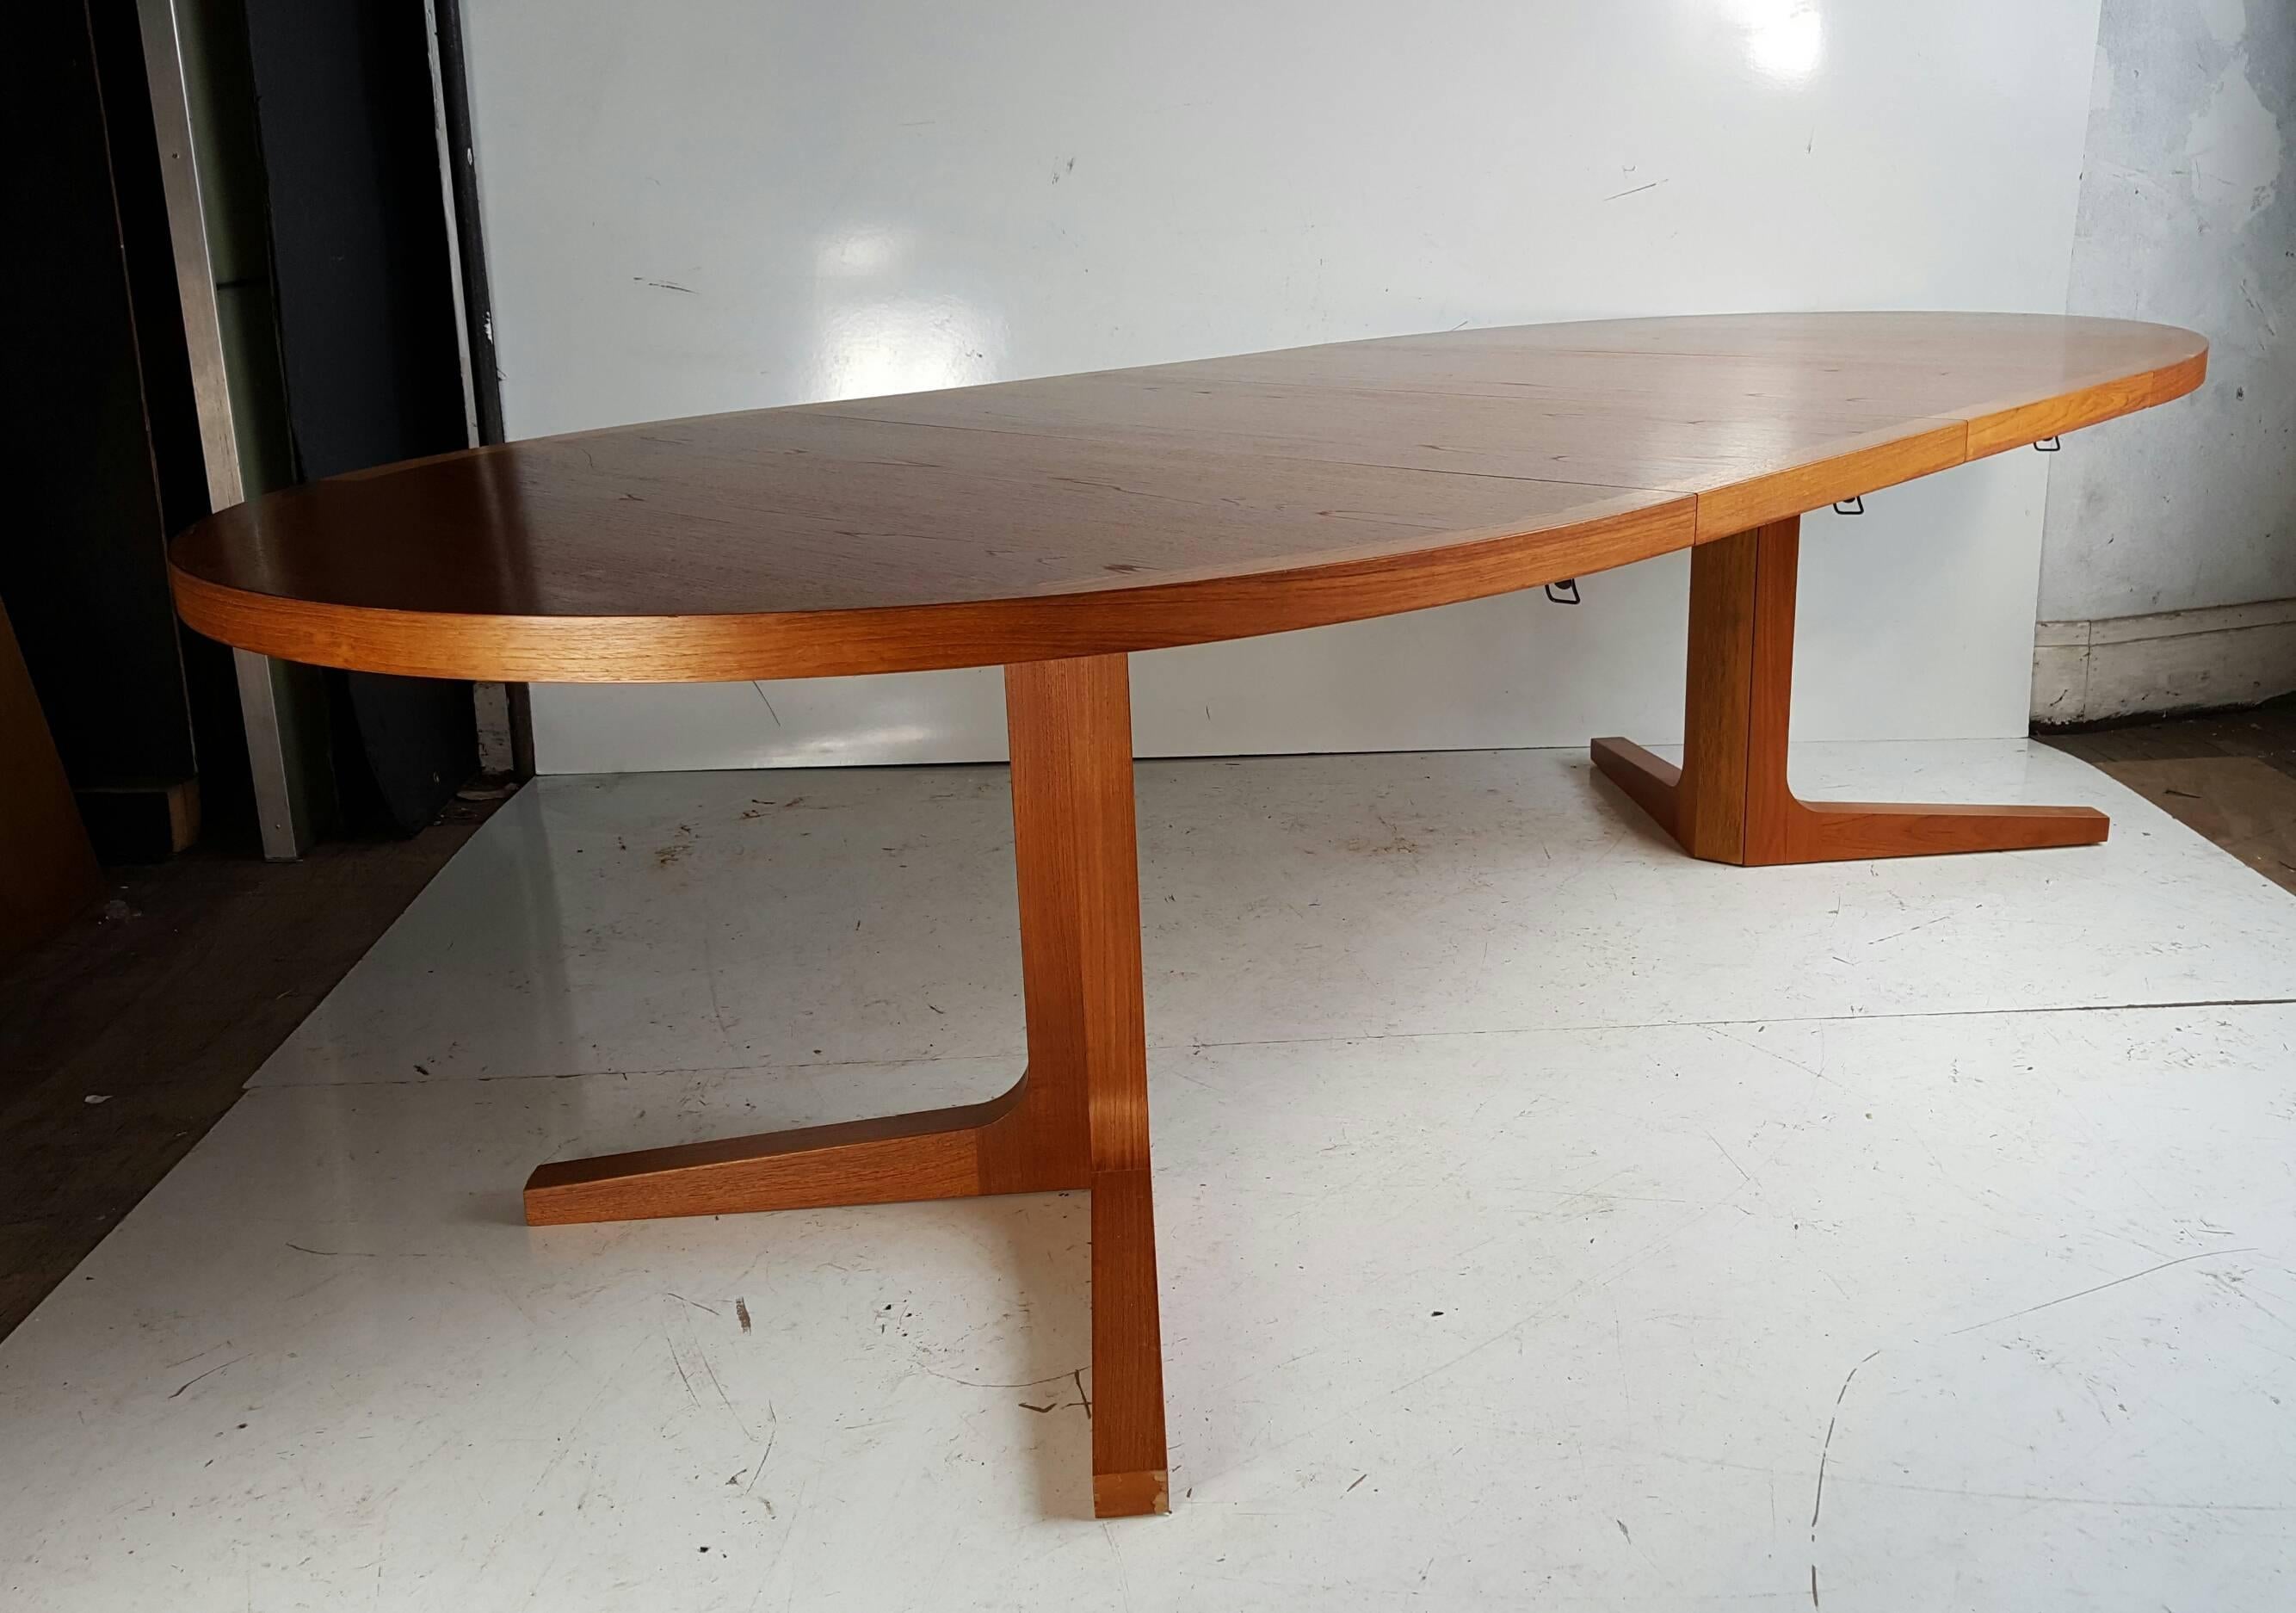 Beautiful solid teak dining table manufactured by G-plan, Denmark. Elegant, simple design, oval shape. Wonderful detailed wood tones, varying color, two 20